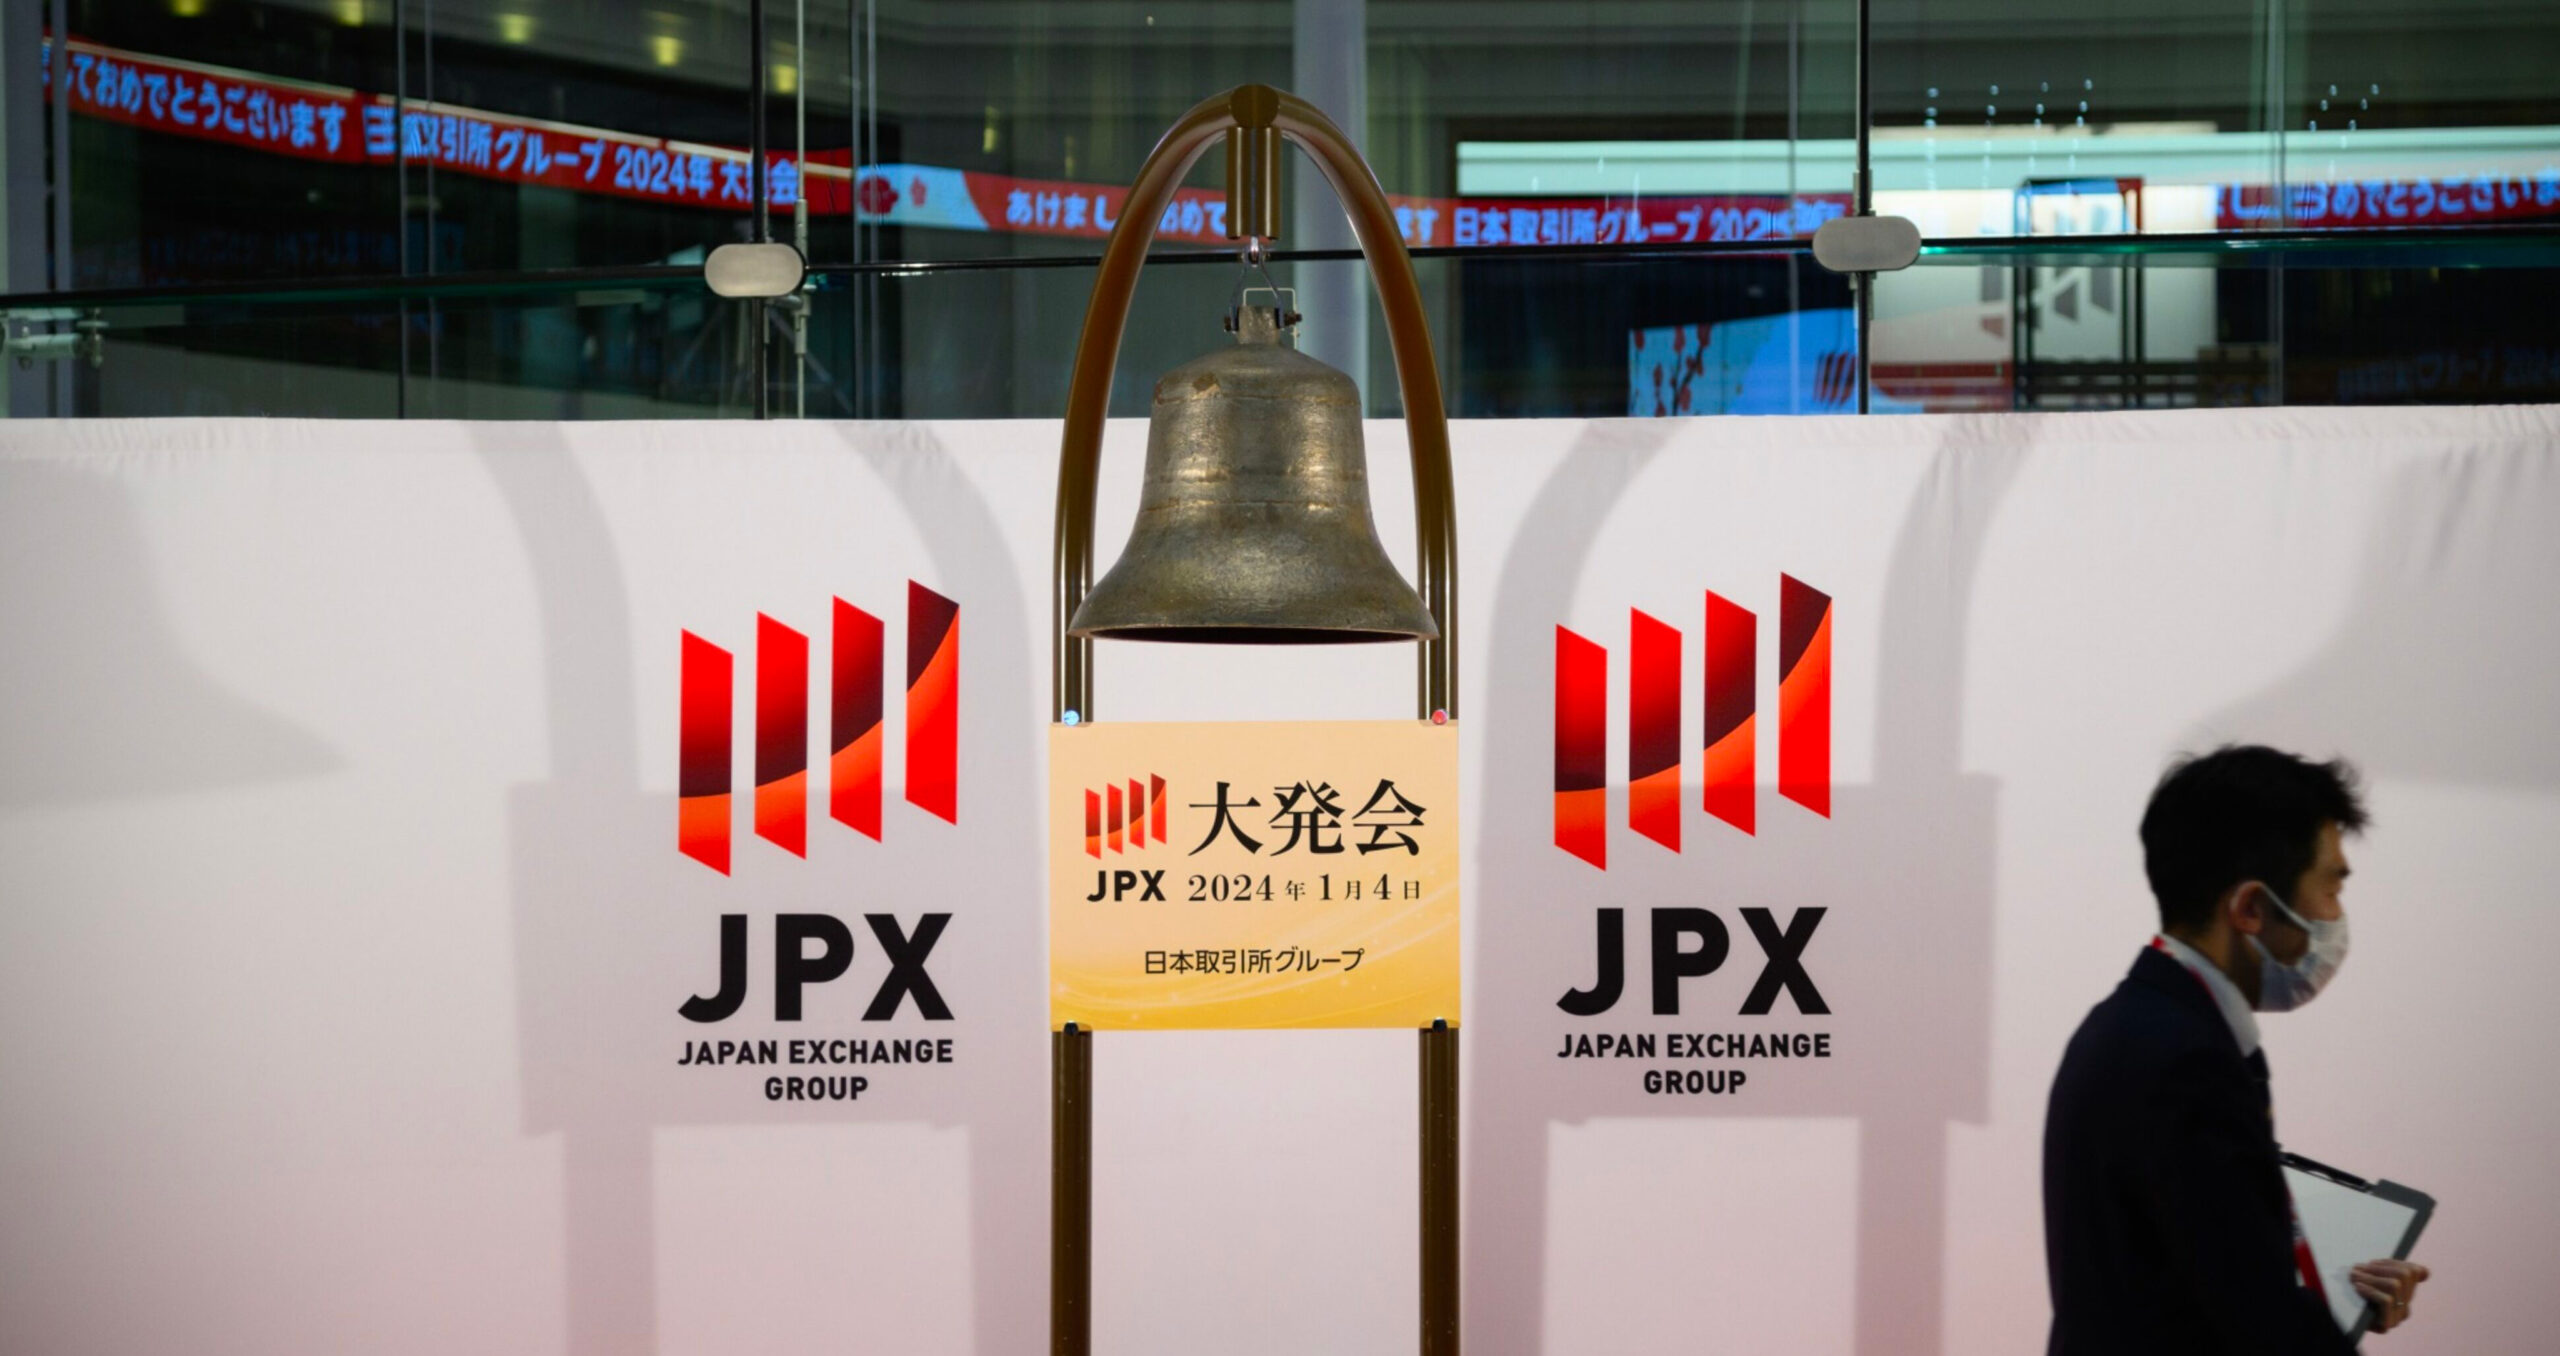 The Tokyo Stock Exchange has published a list of companies that have complied with its latest corporate governance reforms, and intends to update it publicly each month. (Photo: Akio Kon/Bloomberg) 